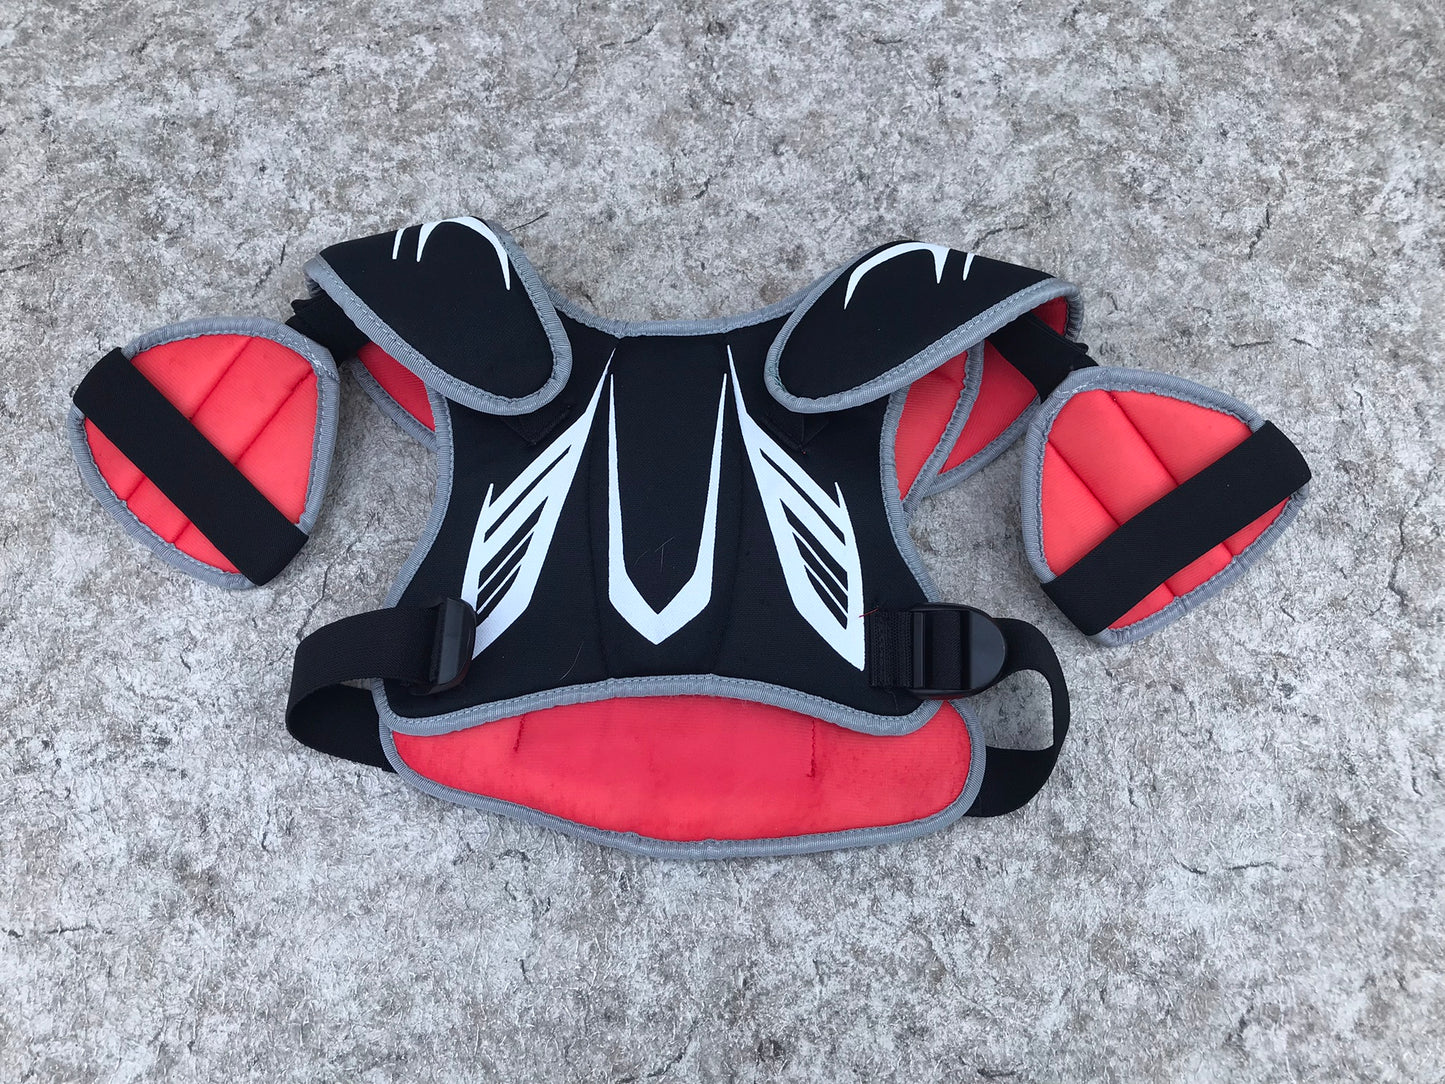 Lacrosse Shoulder Chest Pad Child Size 7-8 STX Black Red As New